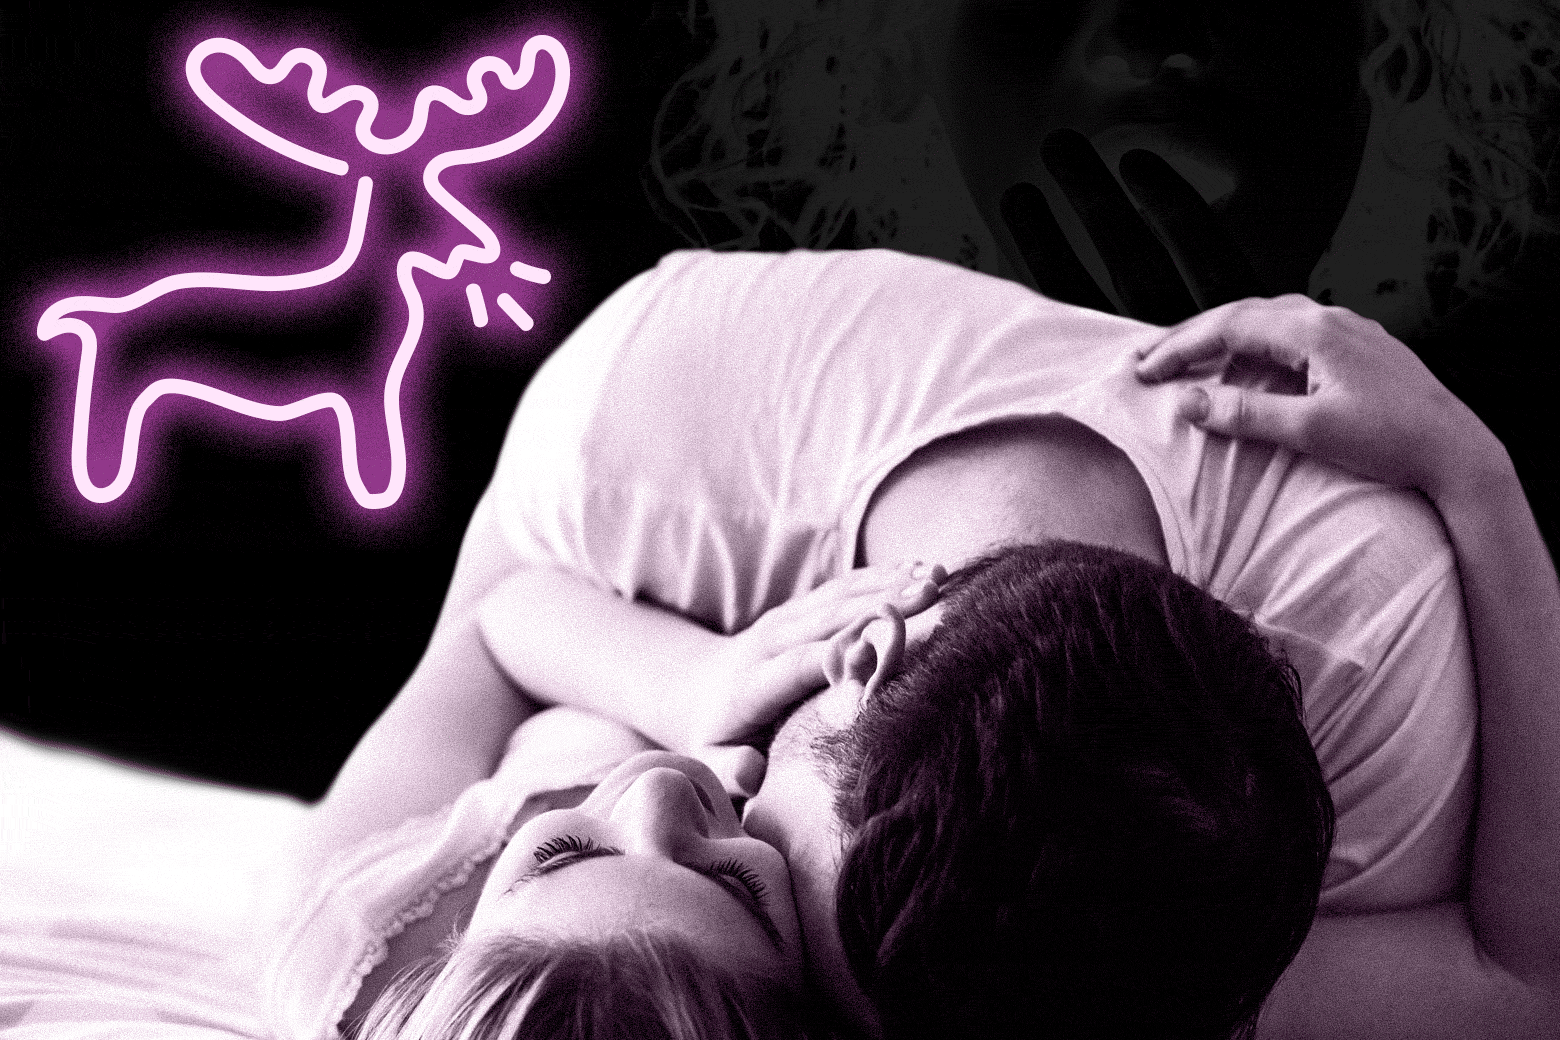 A couple cuddling on a bed with a neon deer in the background.